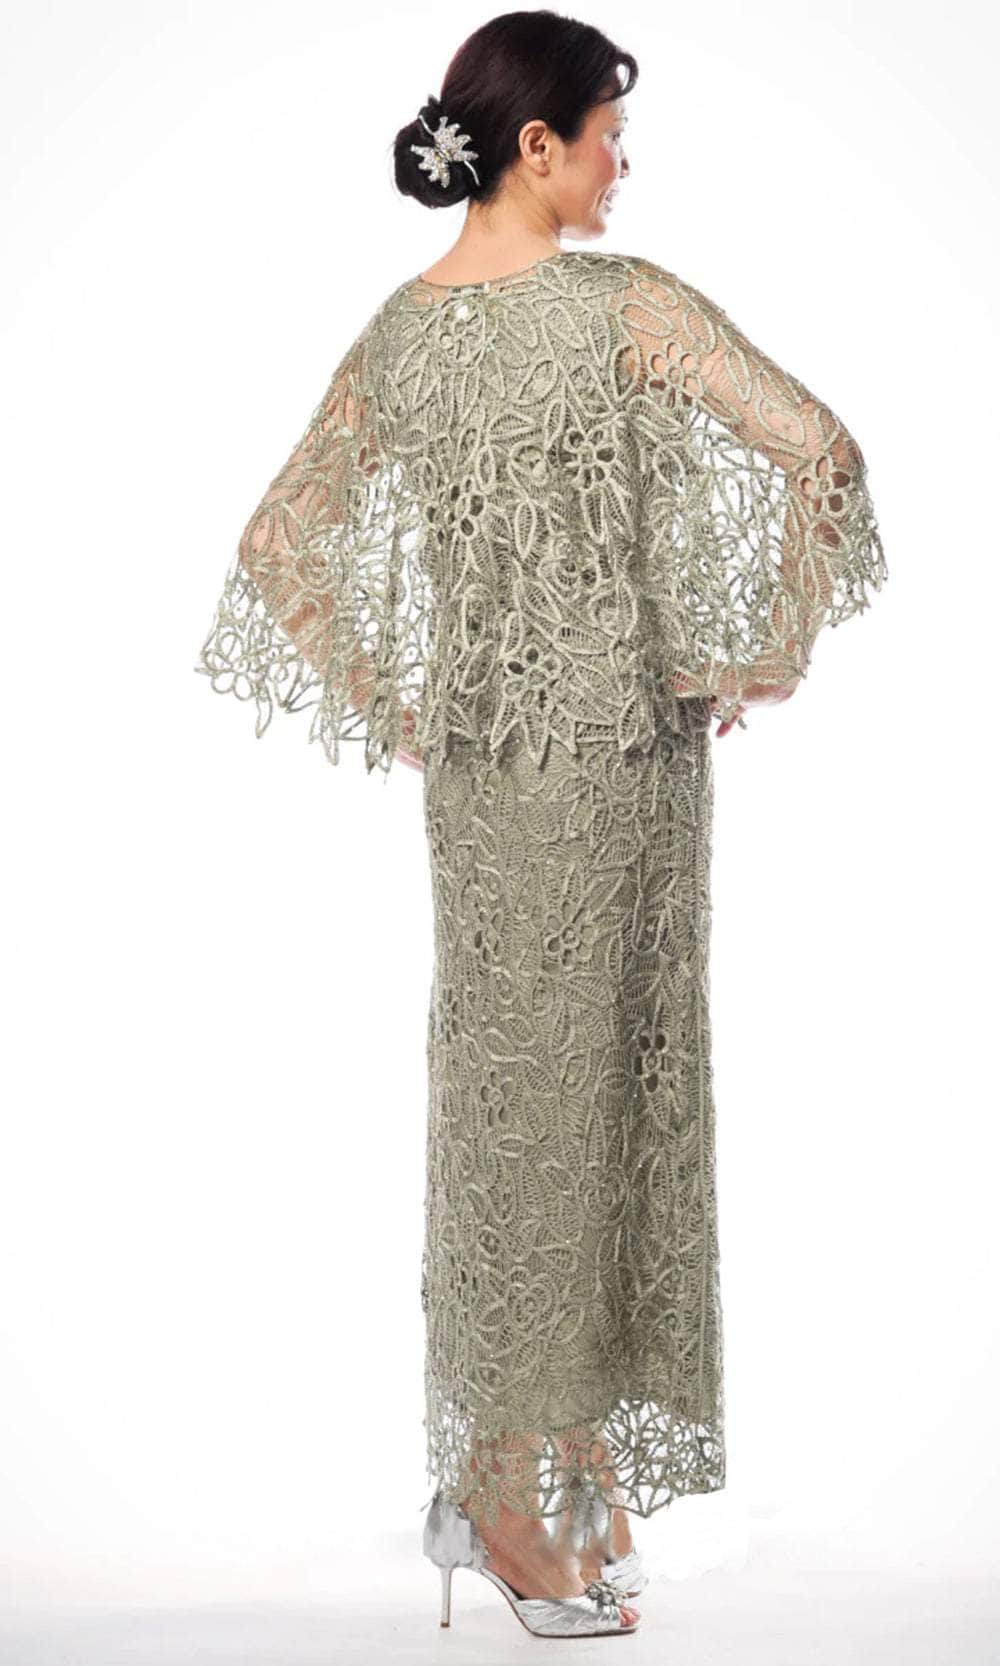 Soulmates, Soulmates C80312 - Beaded Lace Cape Top And Skirt Set